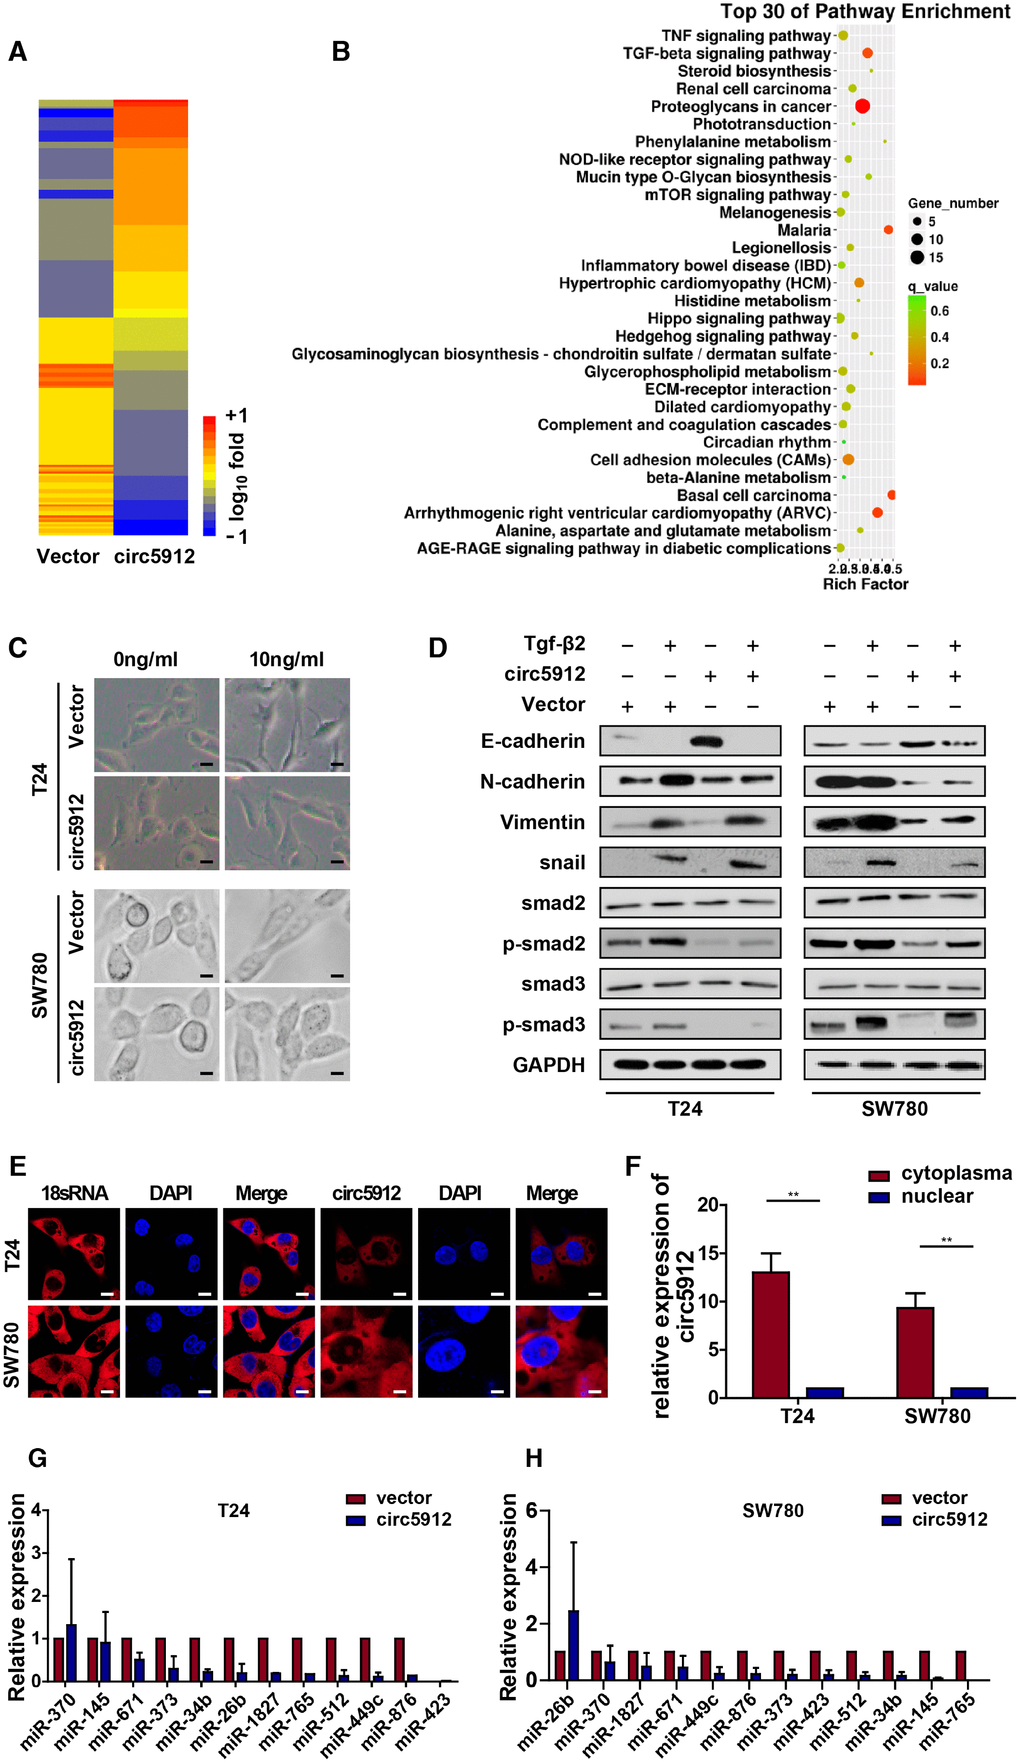 circ5912 reverses Tgf-β2-induced EMT in bladder cancer. To identify the underlying mechanism of circ5912, (A, B) The mRNA sequence was analyzed for the downstream alteration after circ5912 overexpression; cells were treated with TGF-β2 in 10ng/ml for 24 hours to induce EMT. (C) the bladder cancer phenotype was observed under light microscope, scale bar: 2.5μm; (D) western blot analysis was performed to determine the levels of different endothelial and mesenchymal markers; (E) FISH and (F) nuclear-plasma extraction assays were performed to detect the location of circ5912, scale bar: 2.5μm. Cytoplasmic 18s RNA was used as a positive control; (G, H) RNA pulldown assay showed the binding properties of multiple miRNAs and circ5912.